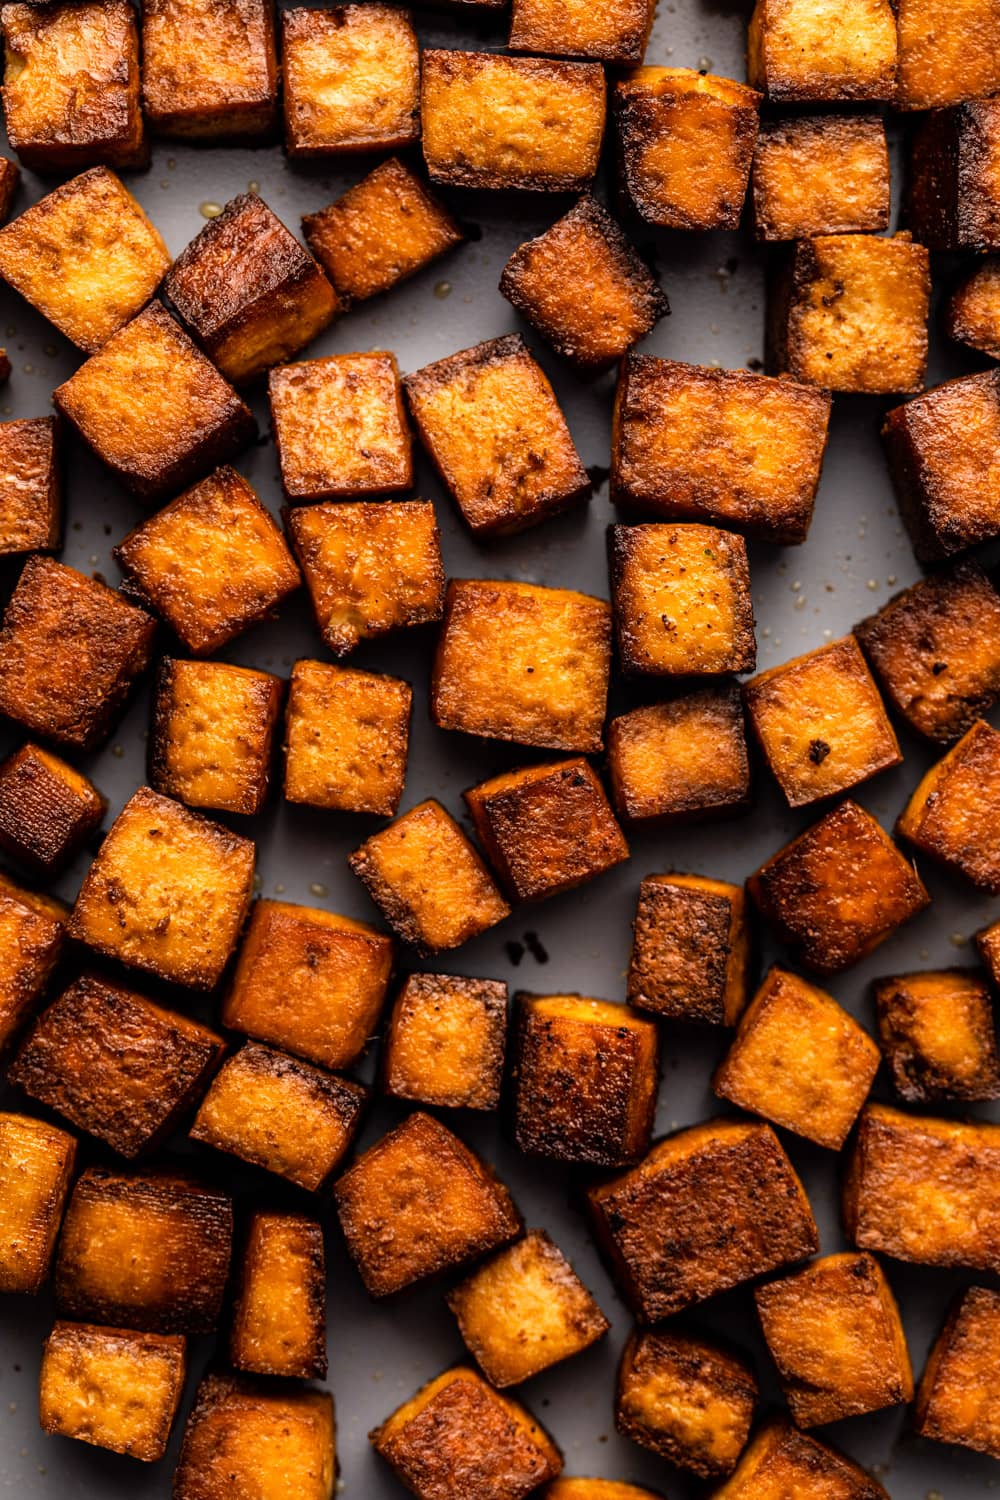 a zoomed in image of smoky marinated tofu on a baking tray